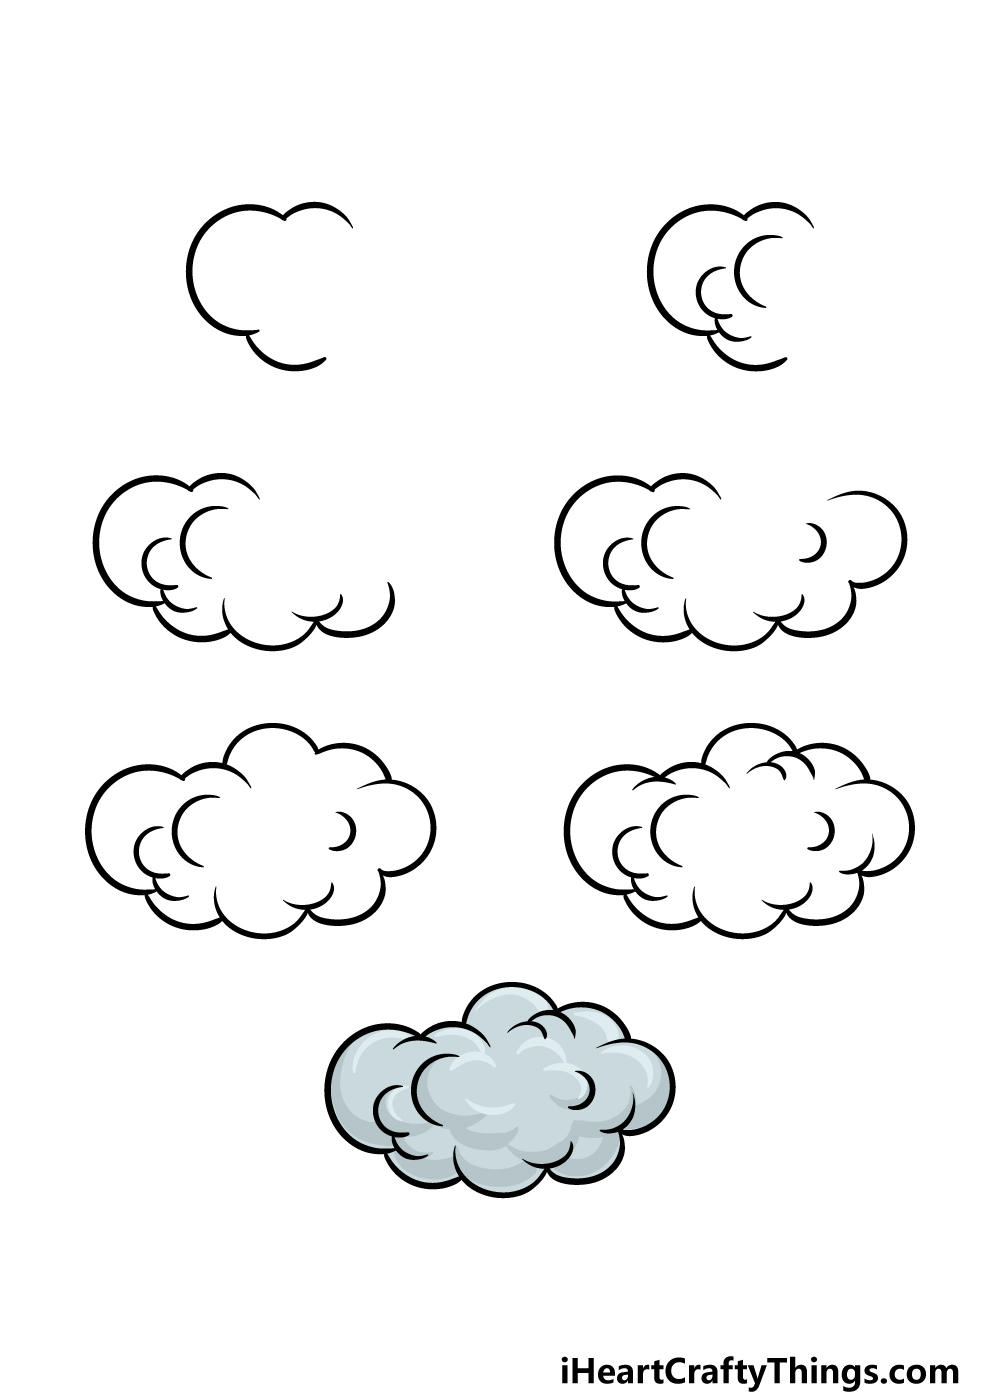 How to Draw A Cartoon cloud in 7 steps